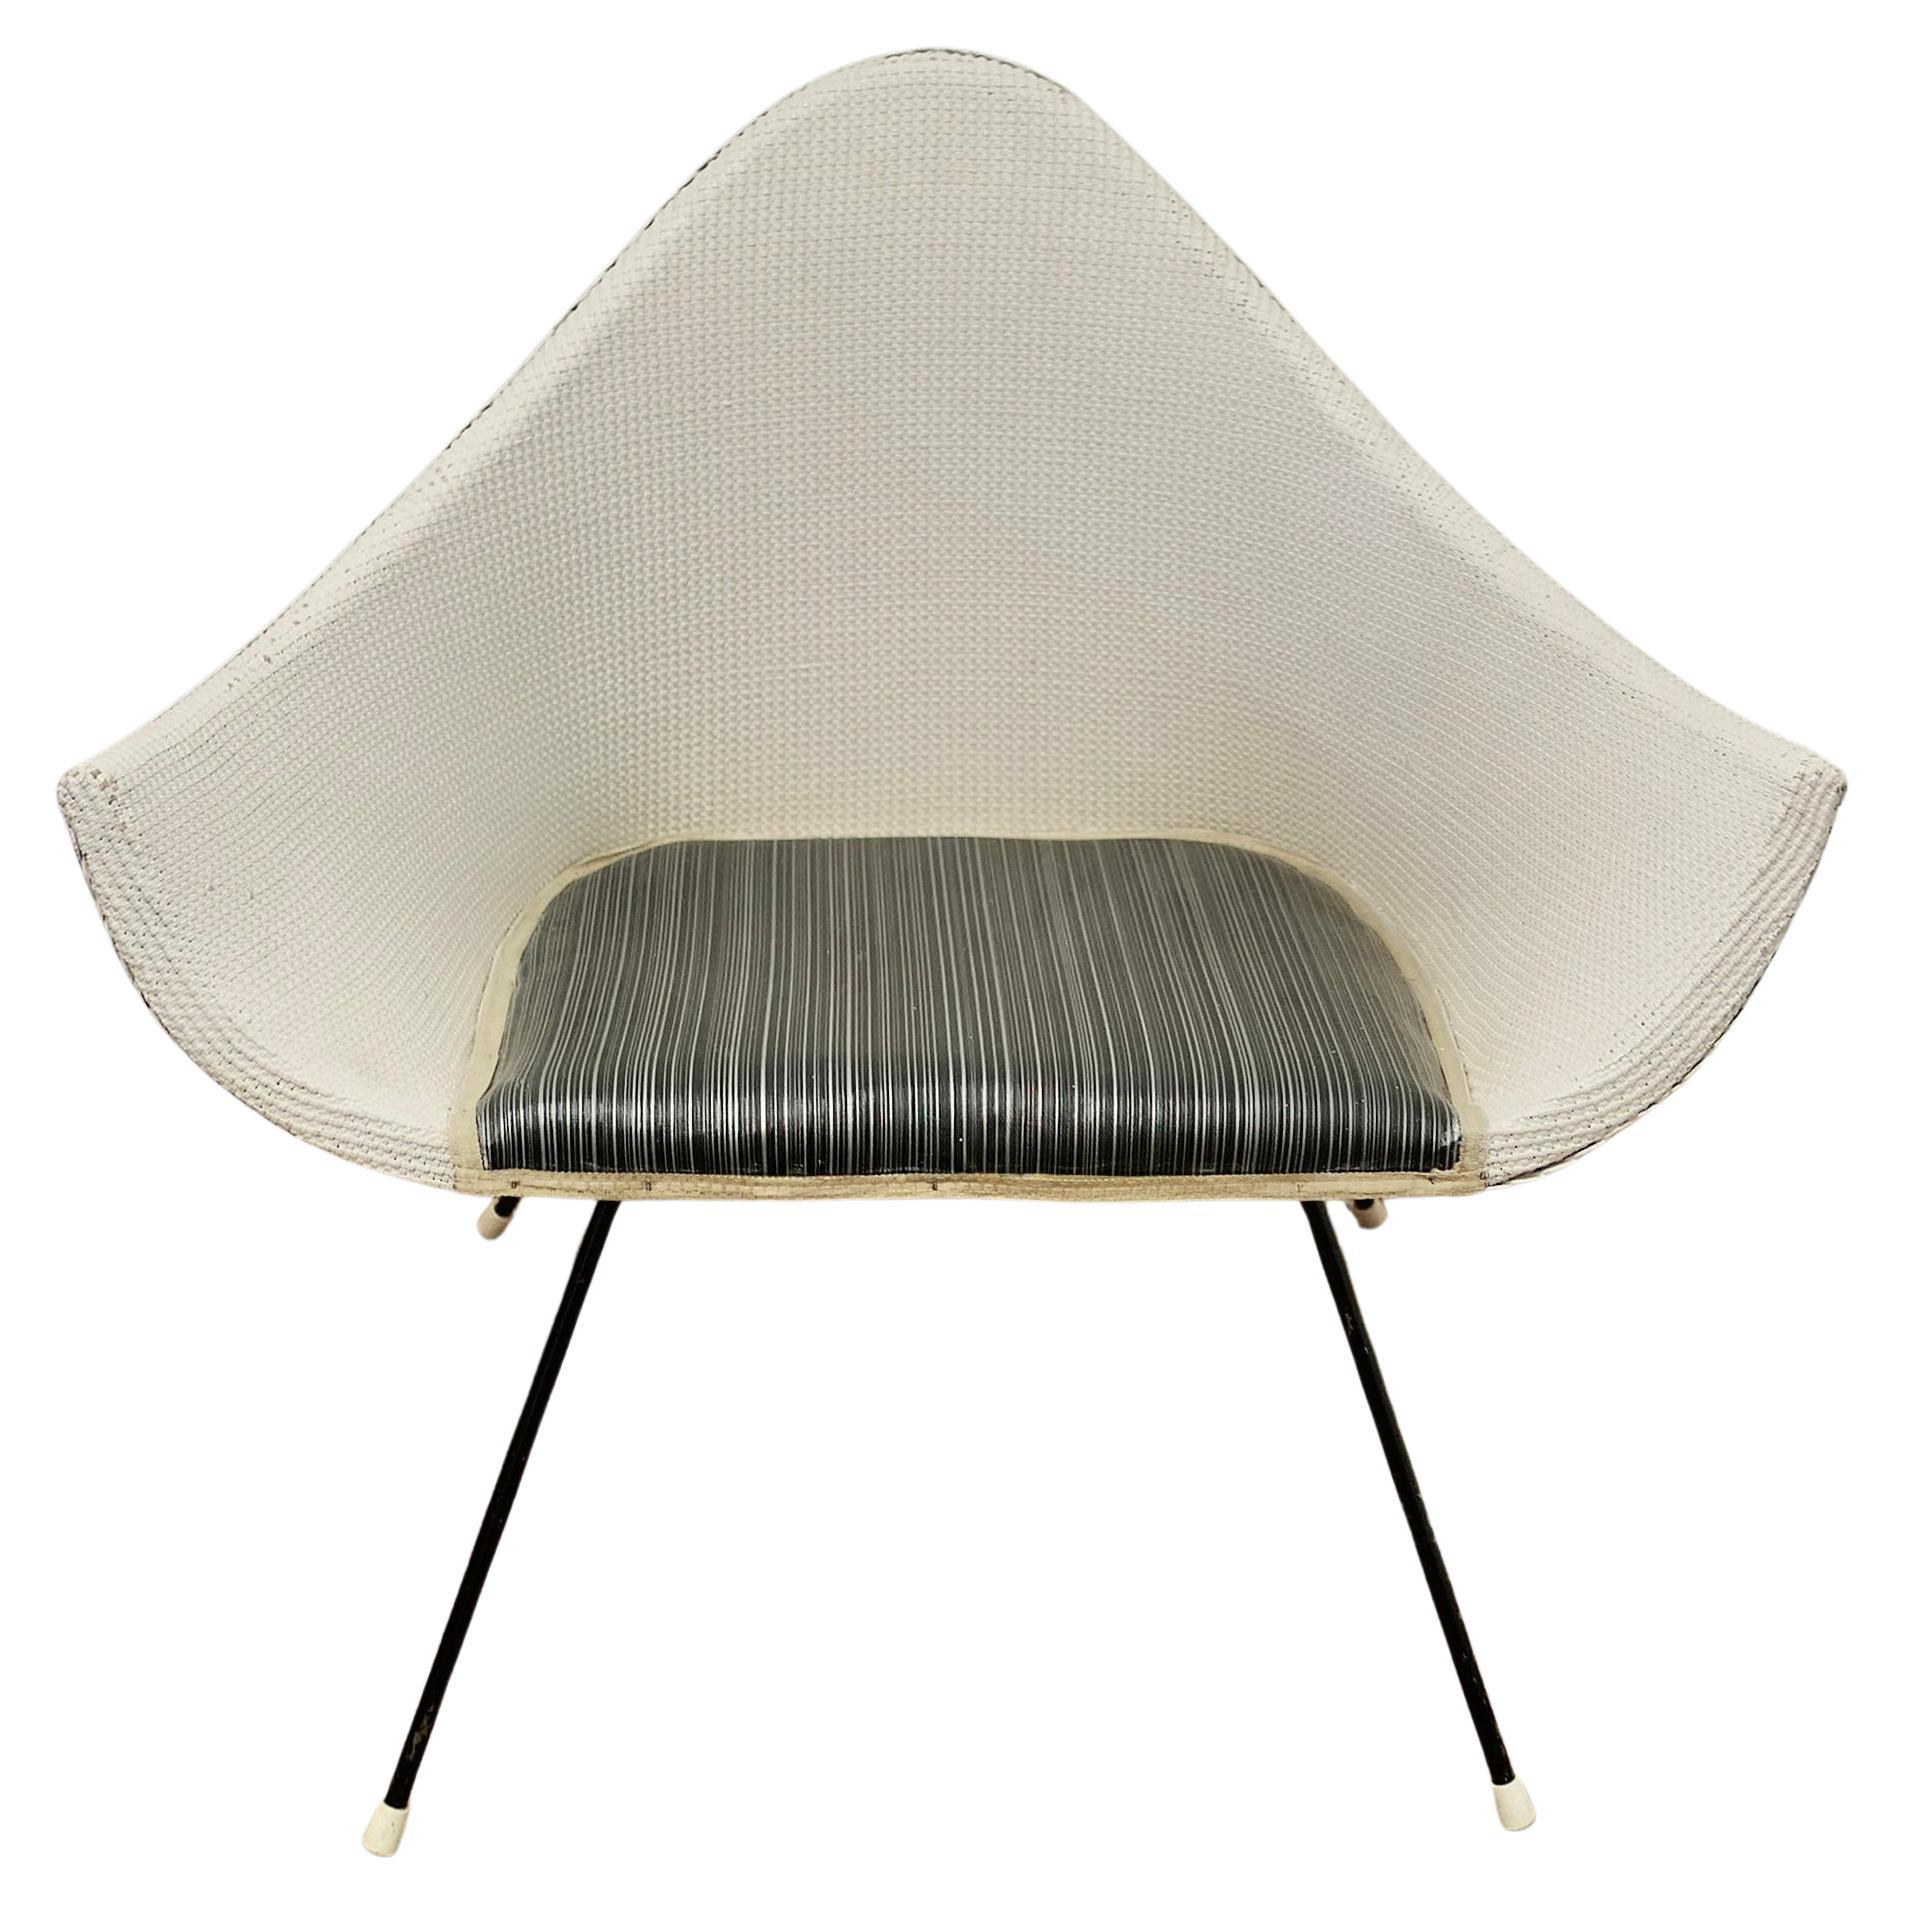 Lloyd Loom 1960s “Stingray” Retro Arm Chair   A Quirky statement piece of its ti For Sale